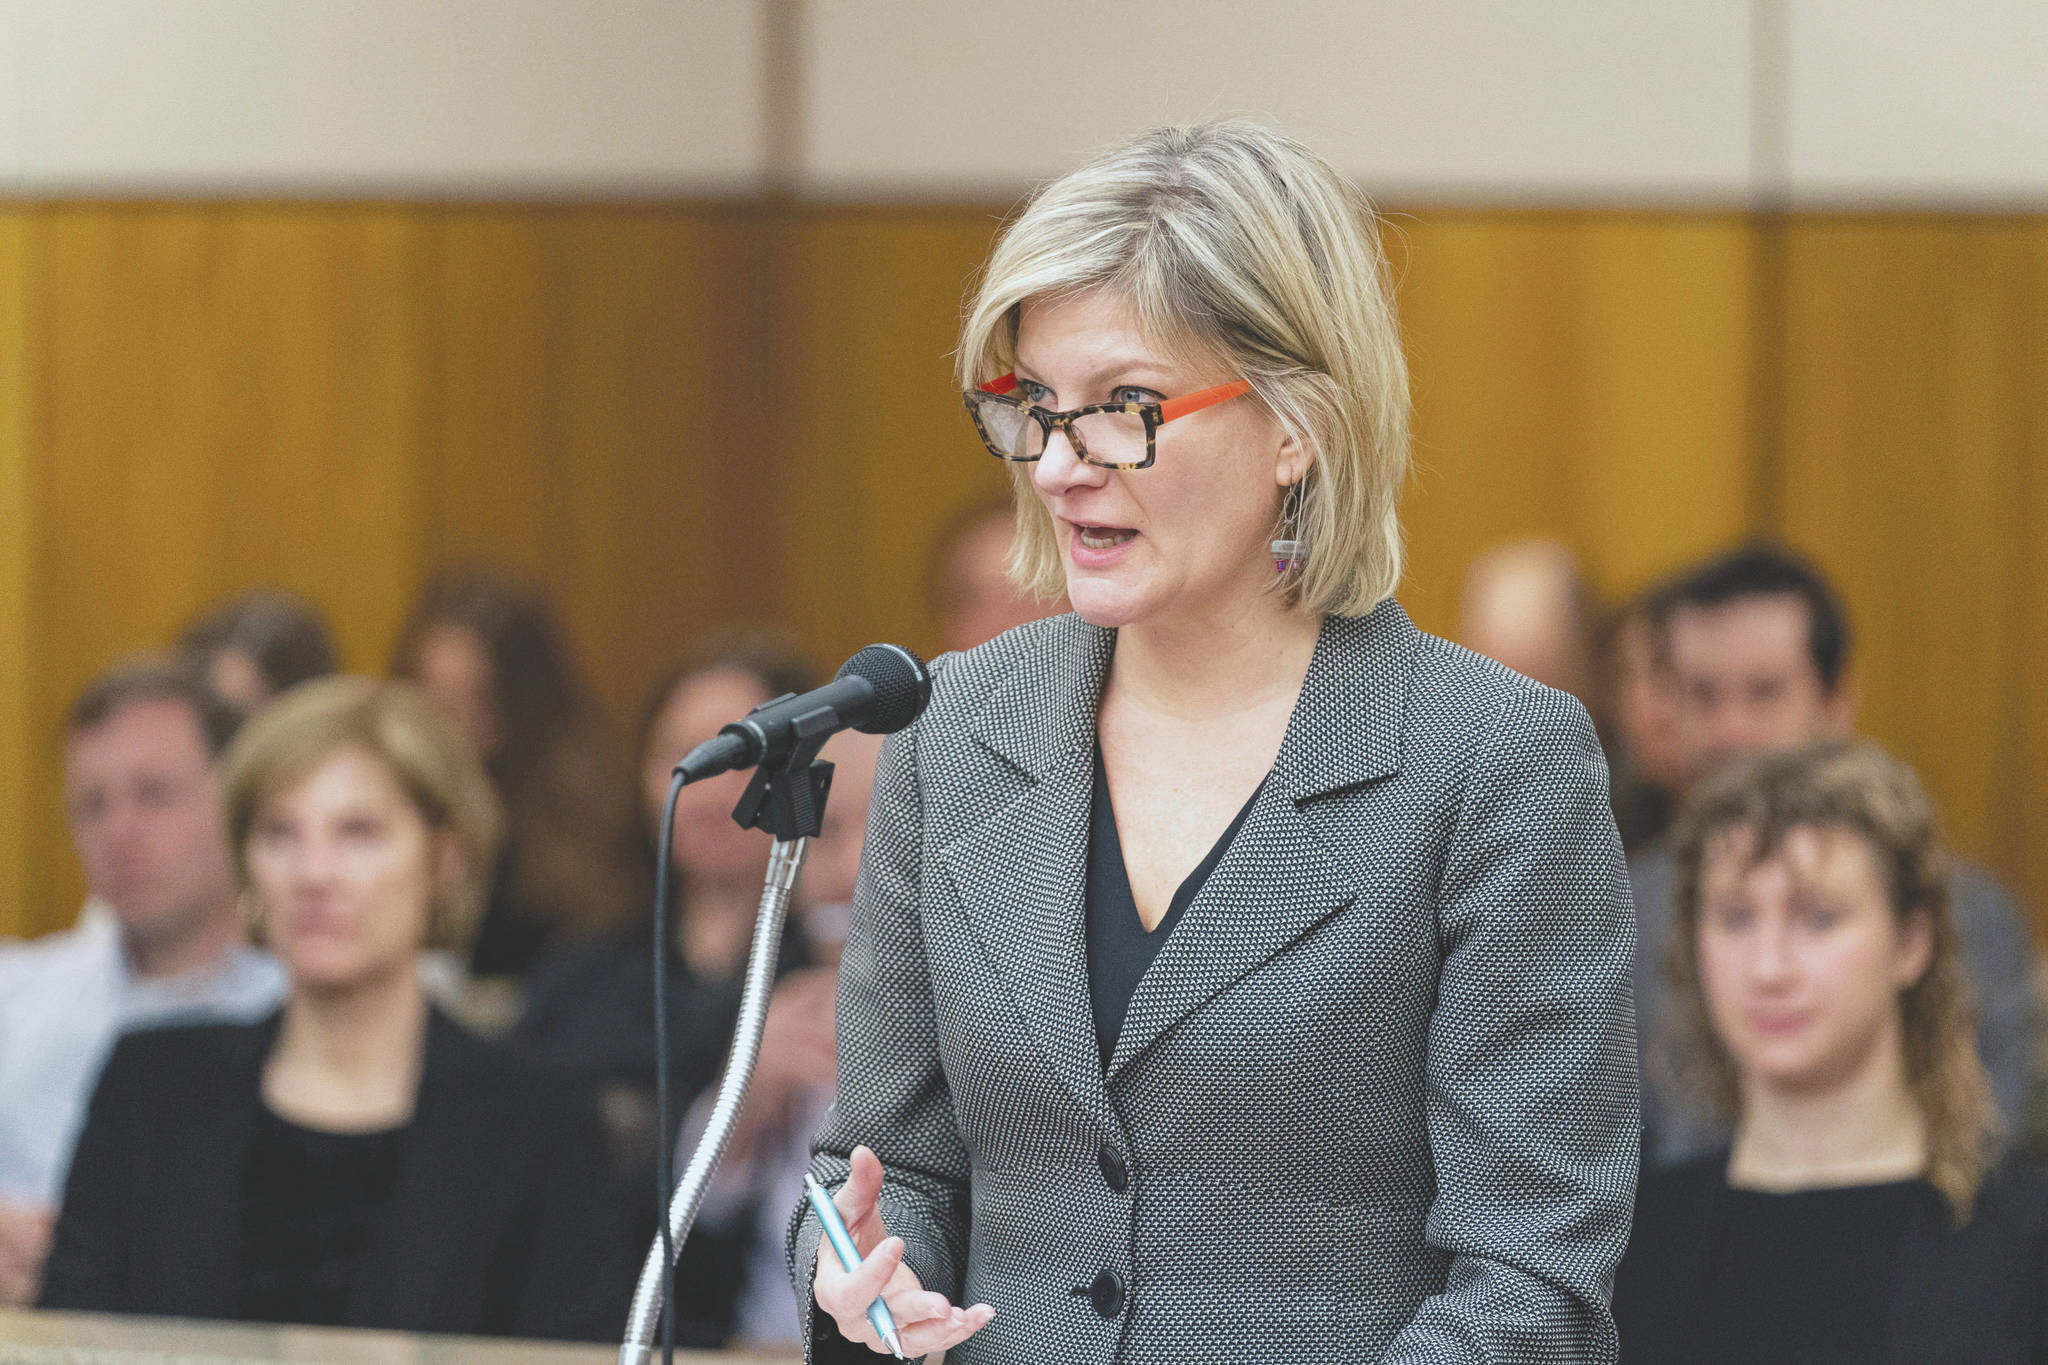 Former Alaska Attorney General Jahna Lindemuth argues on behalf of the Recall Dunleavy campaign Friday, Jan. 10, 2020 in Alaska Superior Court. The campaign alleges that the state improperly rejected one step of their recall effort. Judge Eric Aarseth ruled that an effort to recall Republican Gov. Mike Dunleavy may proceed, a decision that is expected to be appealed. The decision followed arguments in the case and came two months after Gail Fenumiai, director of the state Division of Elections, rejected a bid to advance the recall effort. (Loren Holmes/Anchorage Daily News via AP)